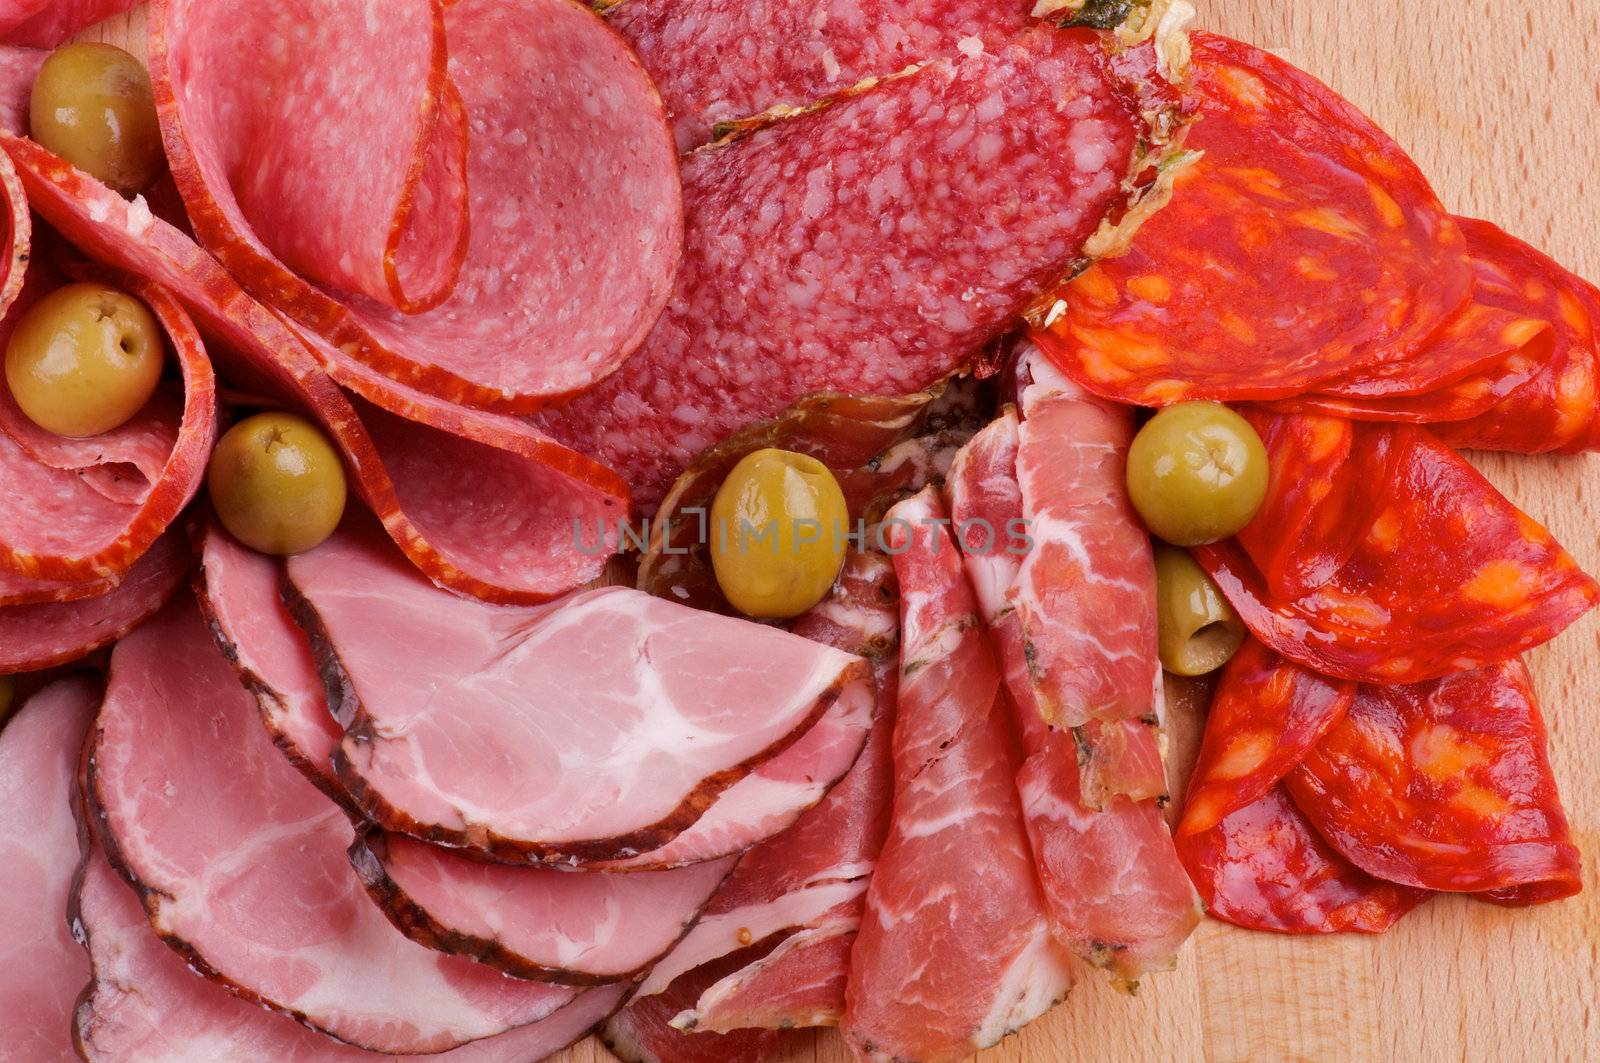 Arrangement of Meat delicatessen with Ham, Pepperoni, Chorizo and Olives close up on wooden backgound